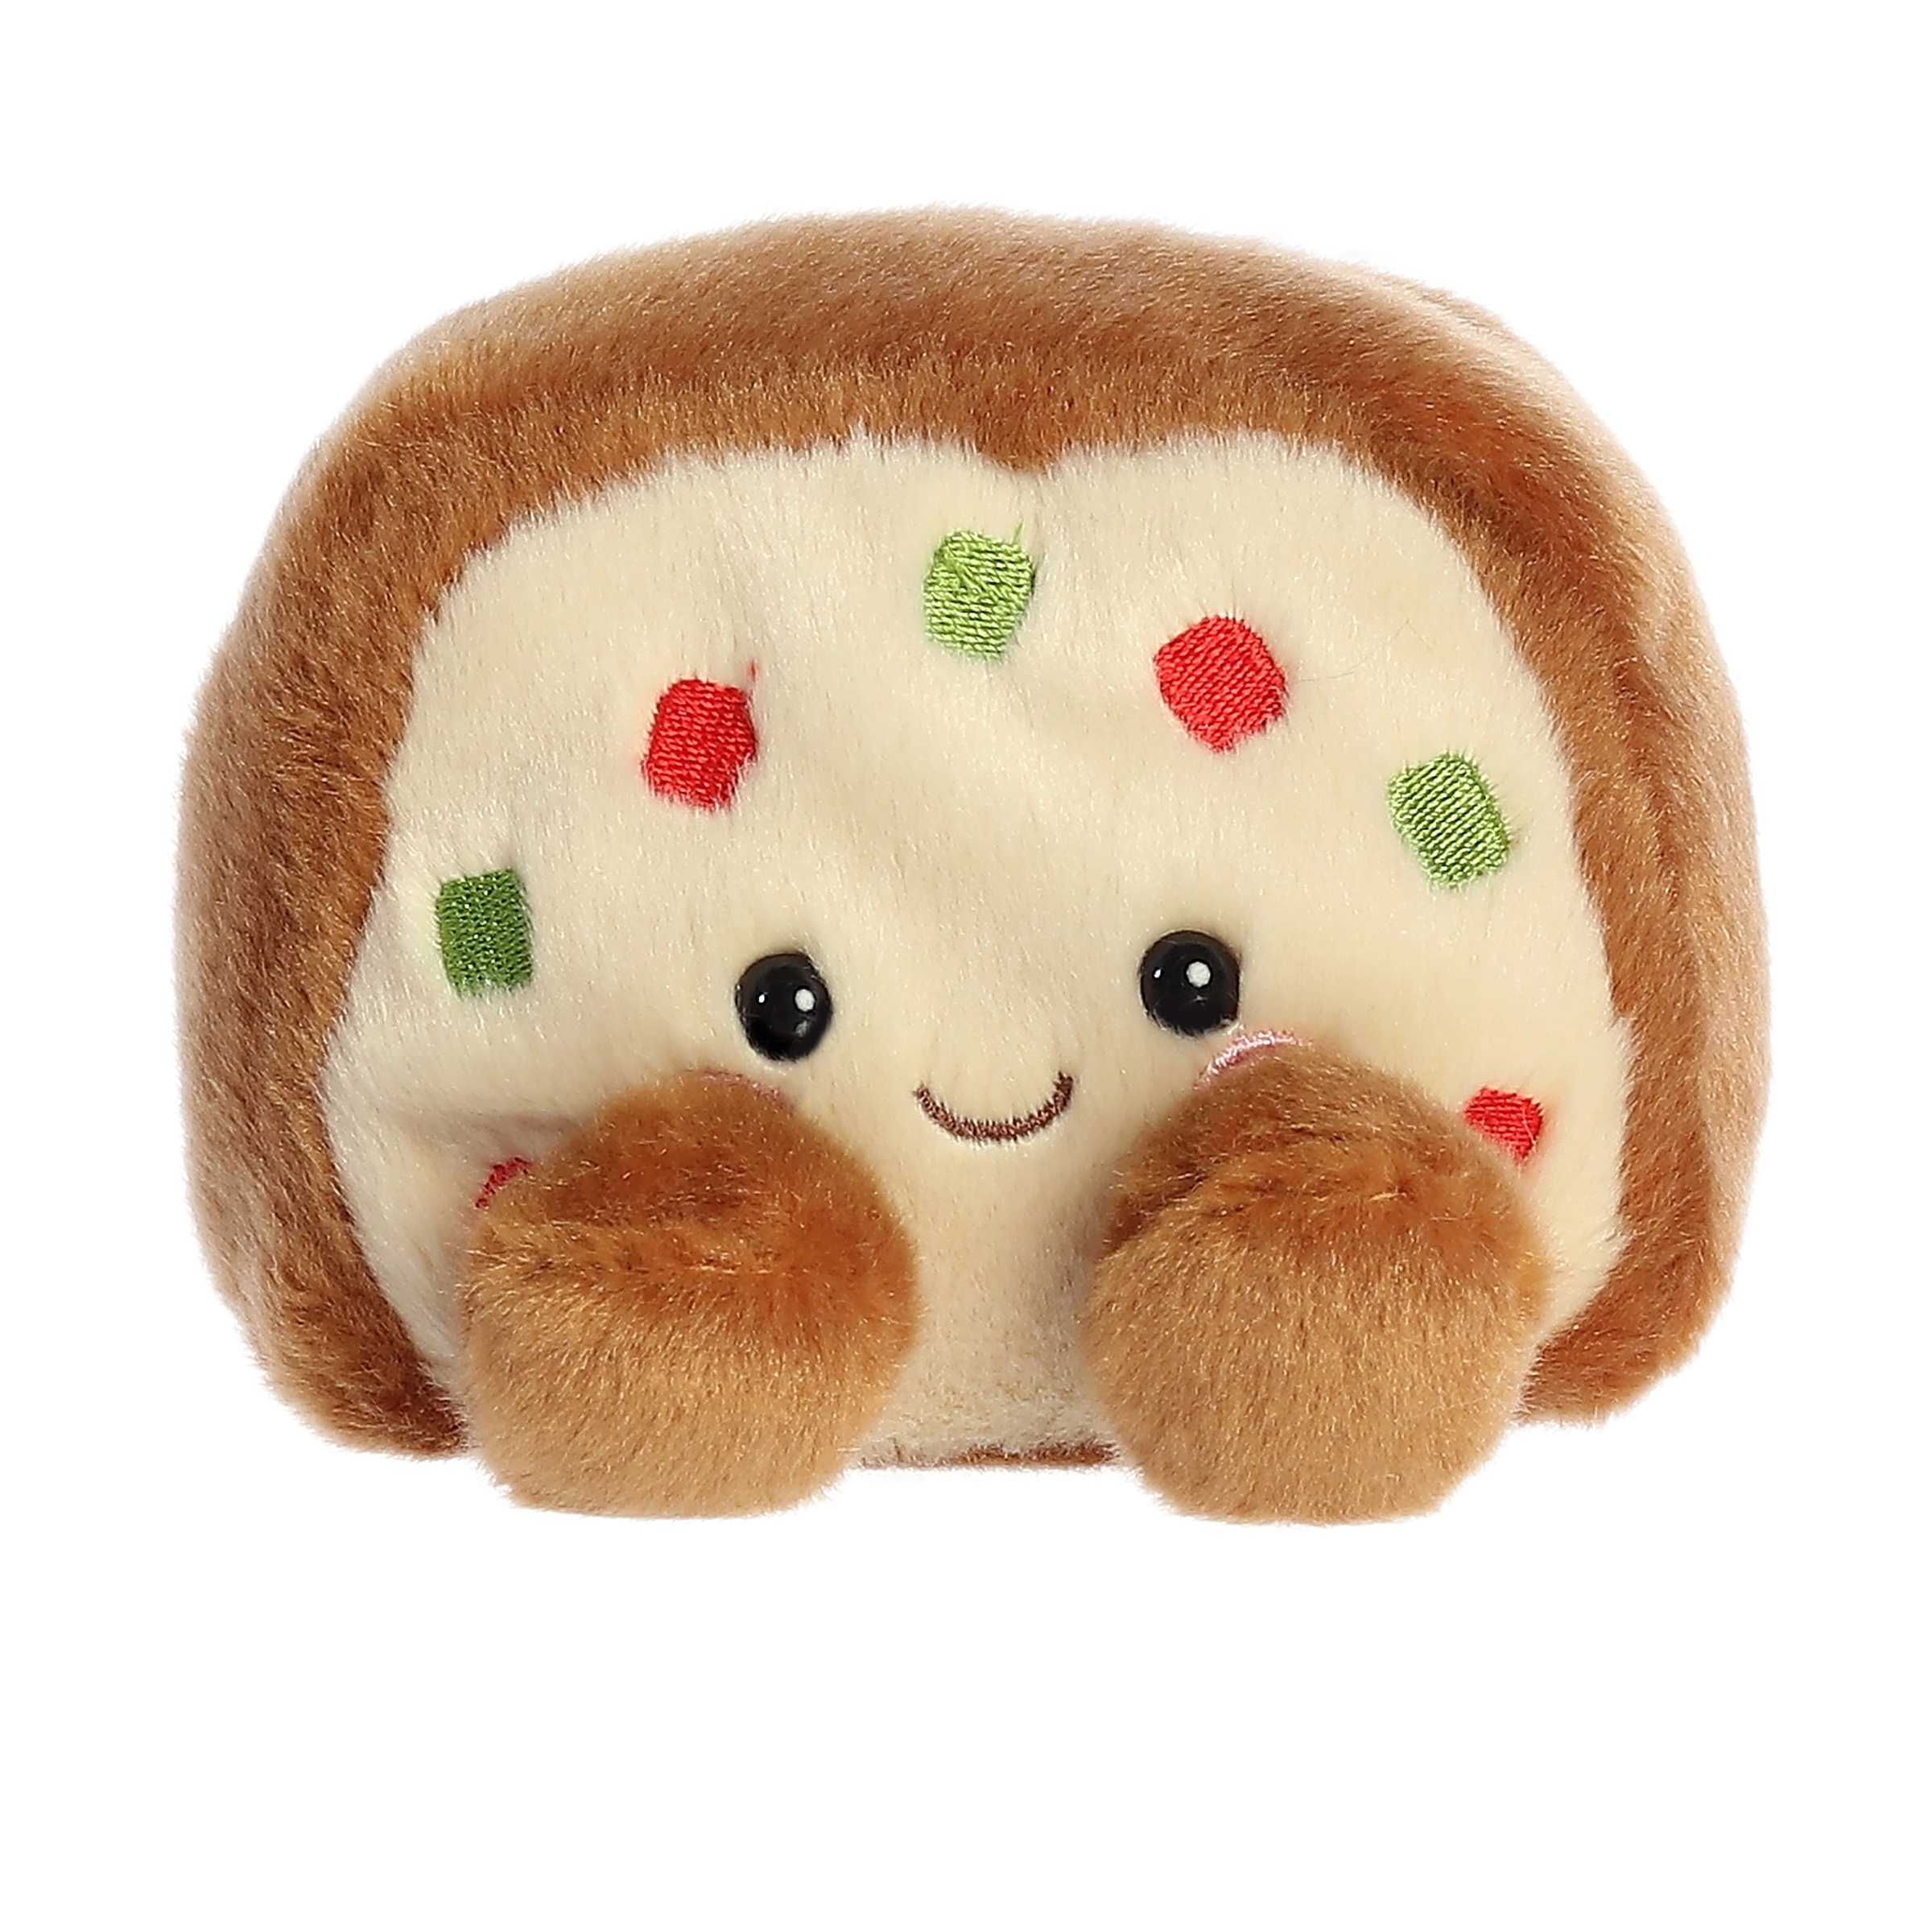 Adorable, happy, mini brown fruit cake plush toy sitting speckled with tiny pieces of red and green fruit